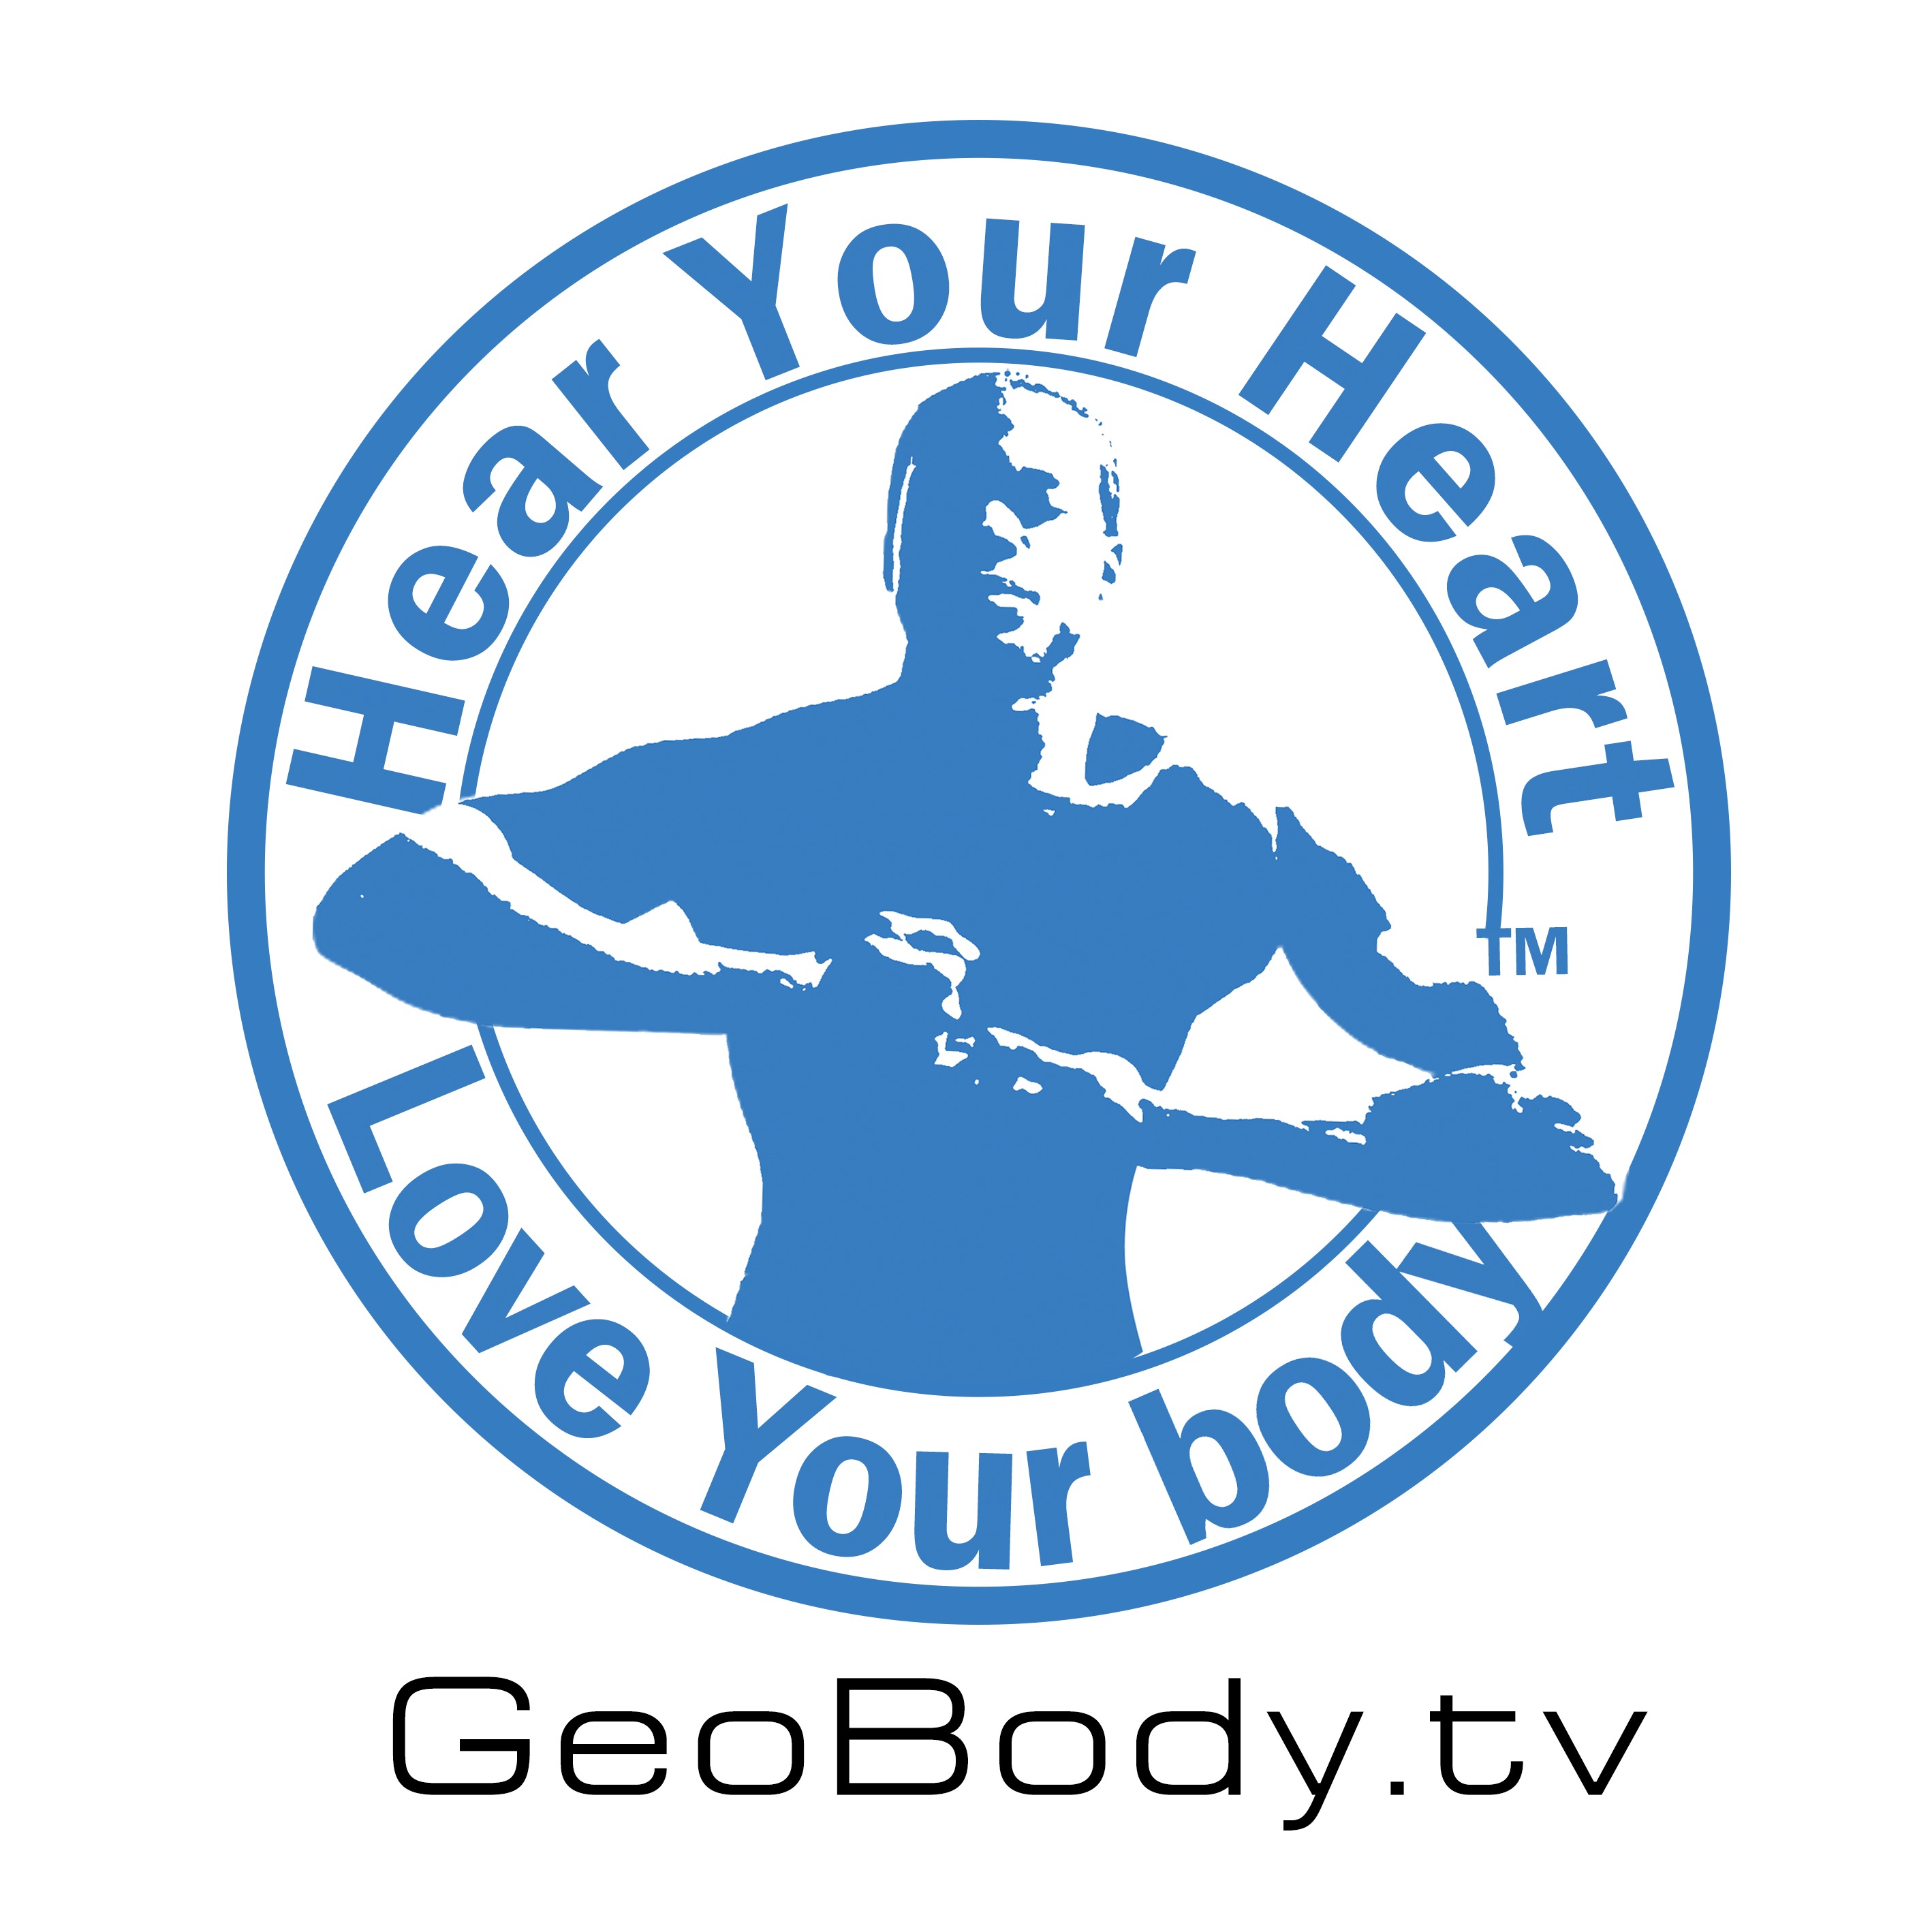  
Geobody.tv A Fitness system that utilize A Time Sense philosophy created to improve our human image 
